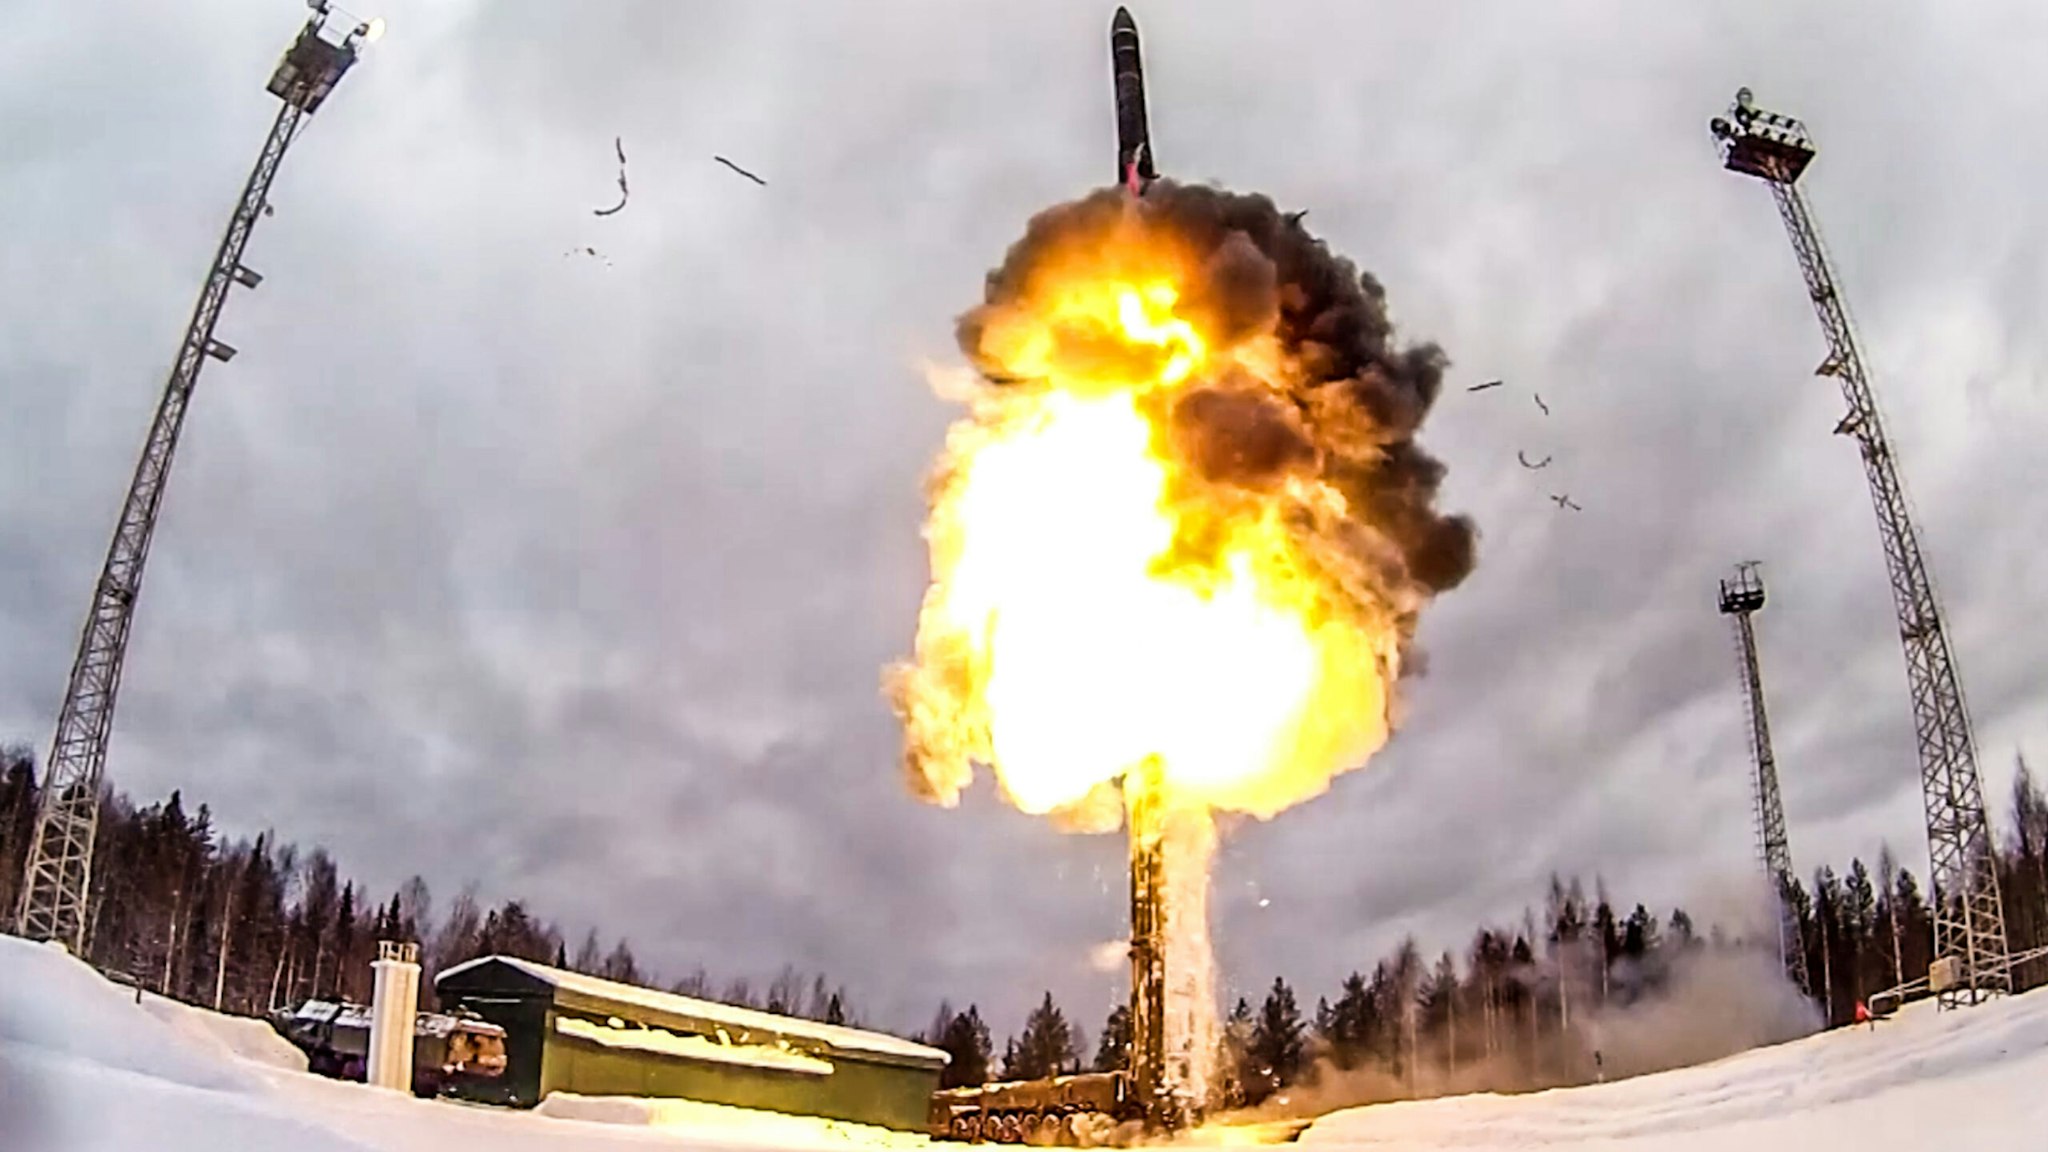 KAMCHATKA TERRITORY, RUSSIA - FEBRUARY 19, 2022: A test launch of an RS-24 Yars intercontinental ballistic missile takes place at the Plesetsk Cosmodrome to hit a Kura range target.